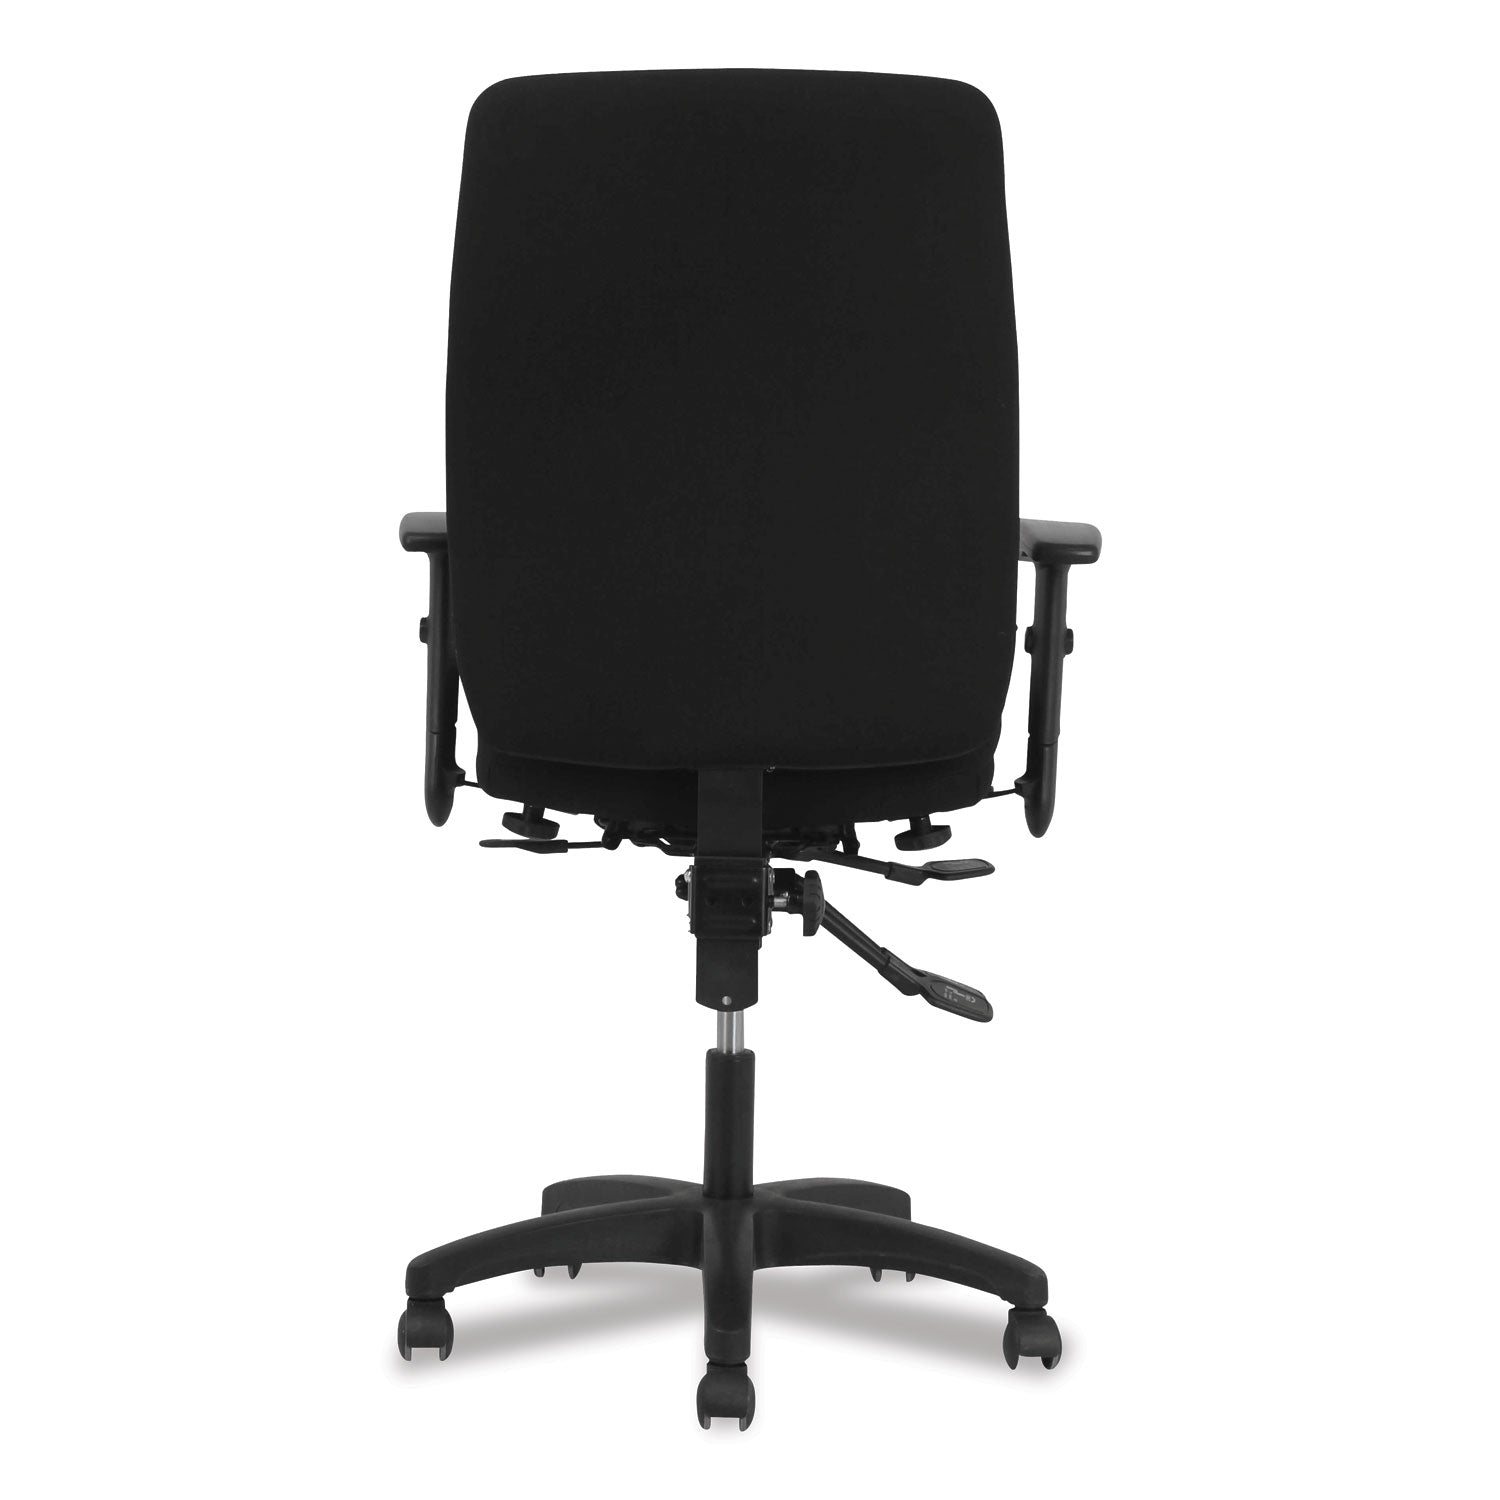 network-high-back-chair-supports-up-to-250-lb-183-to-228-seat-height-black_honvl283a2va10t - 5